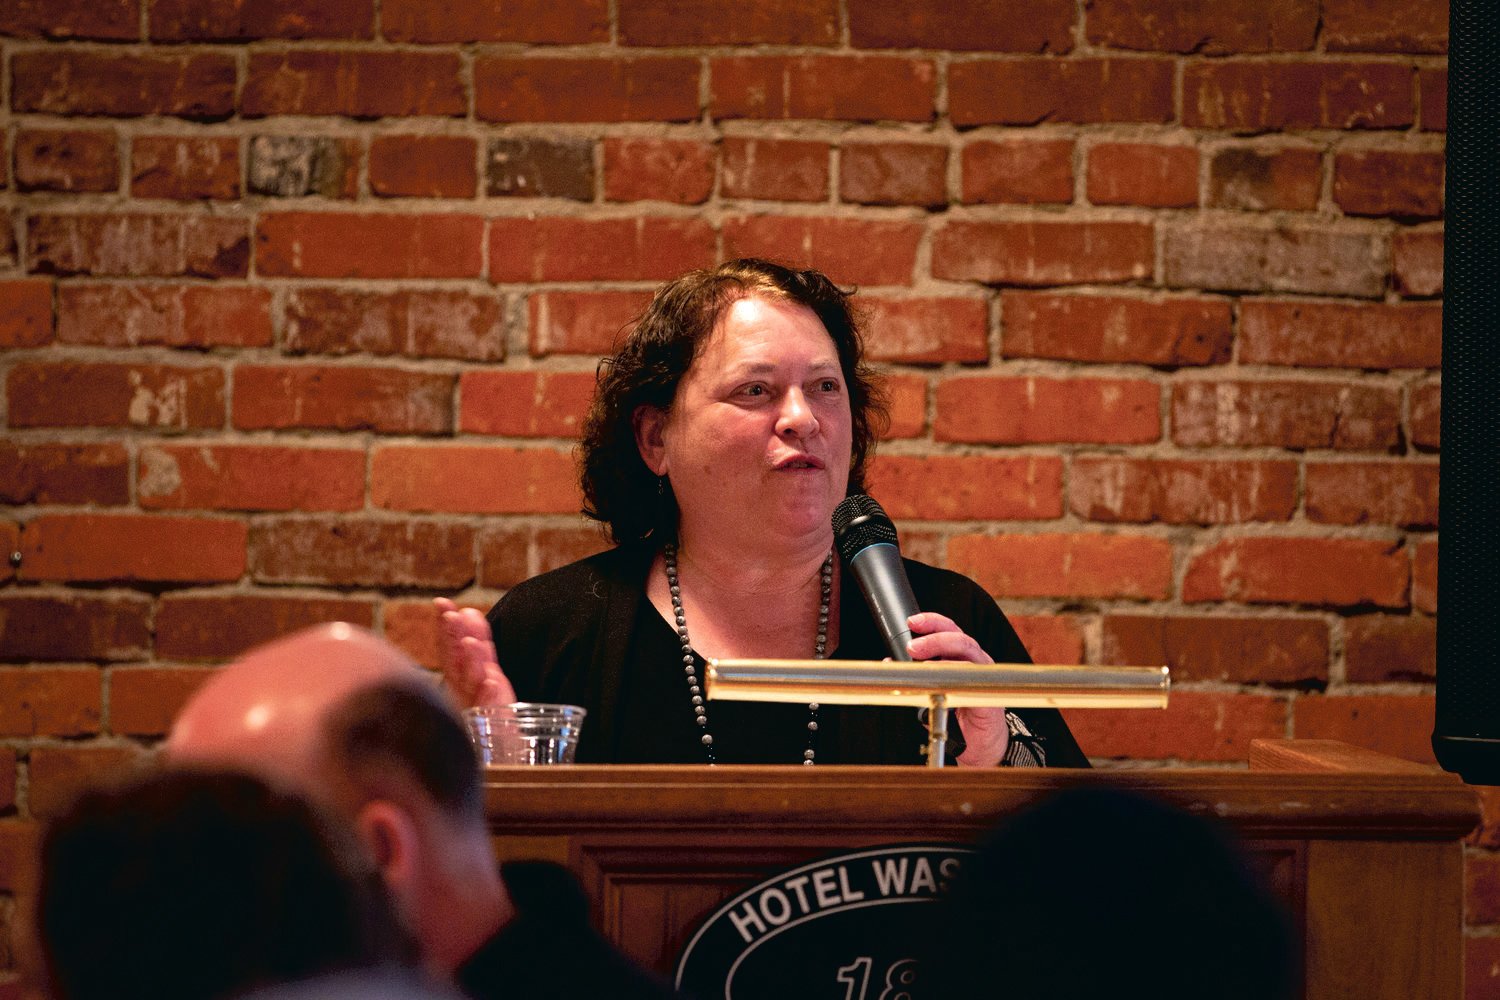 Cynthia Mudge speaks Friday night at the Centralia-Chehalis Chamber of Commerce banquet after being announced as the new executive director of the organization.